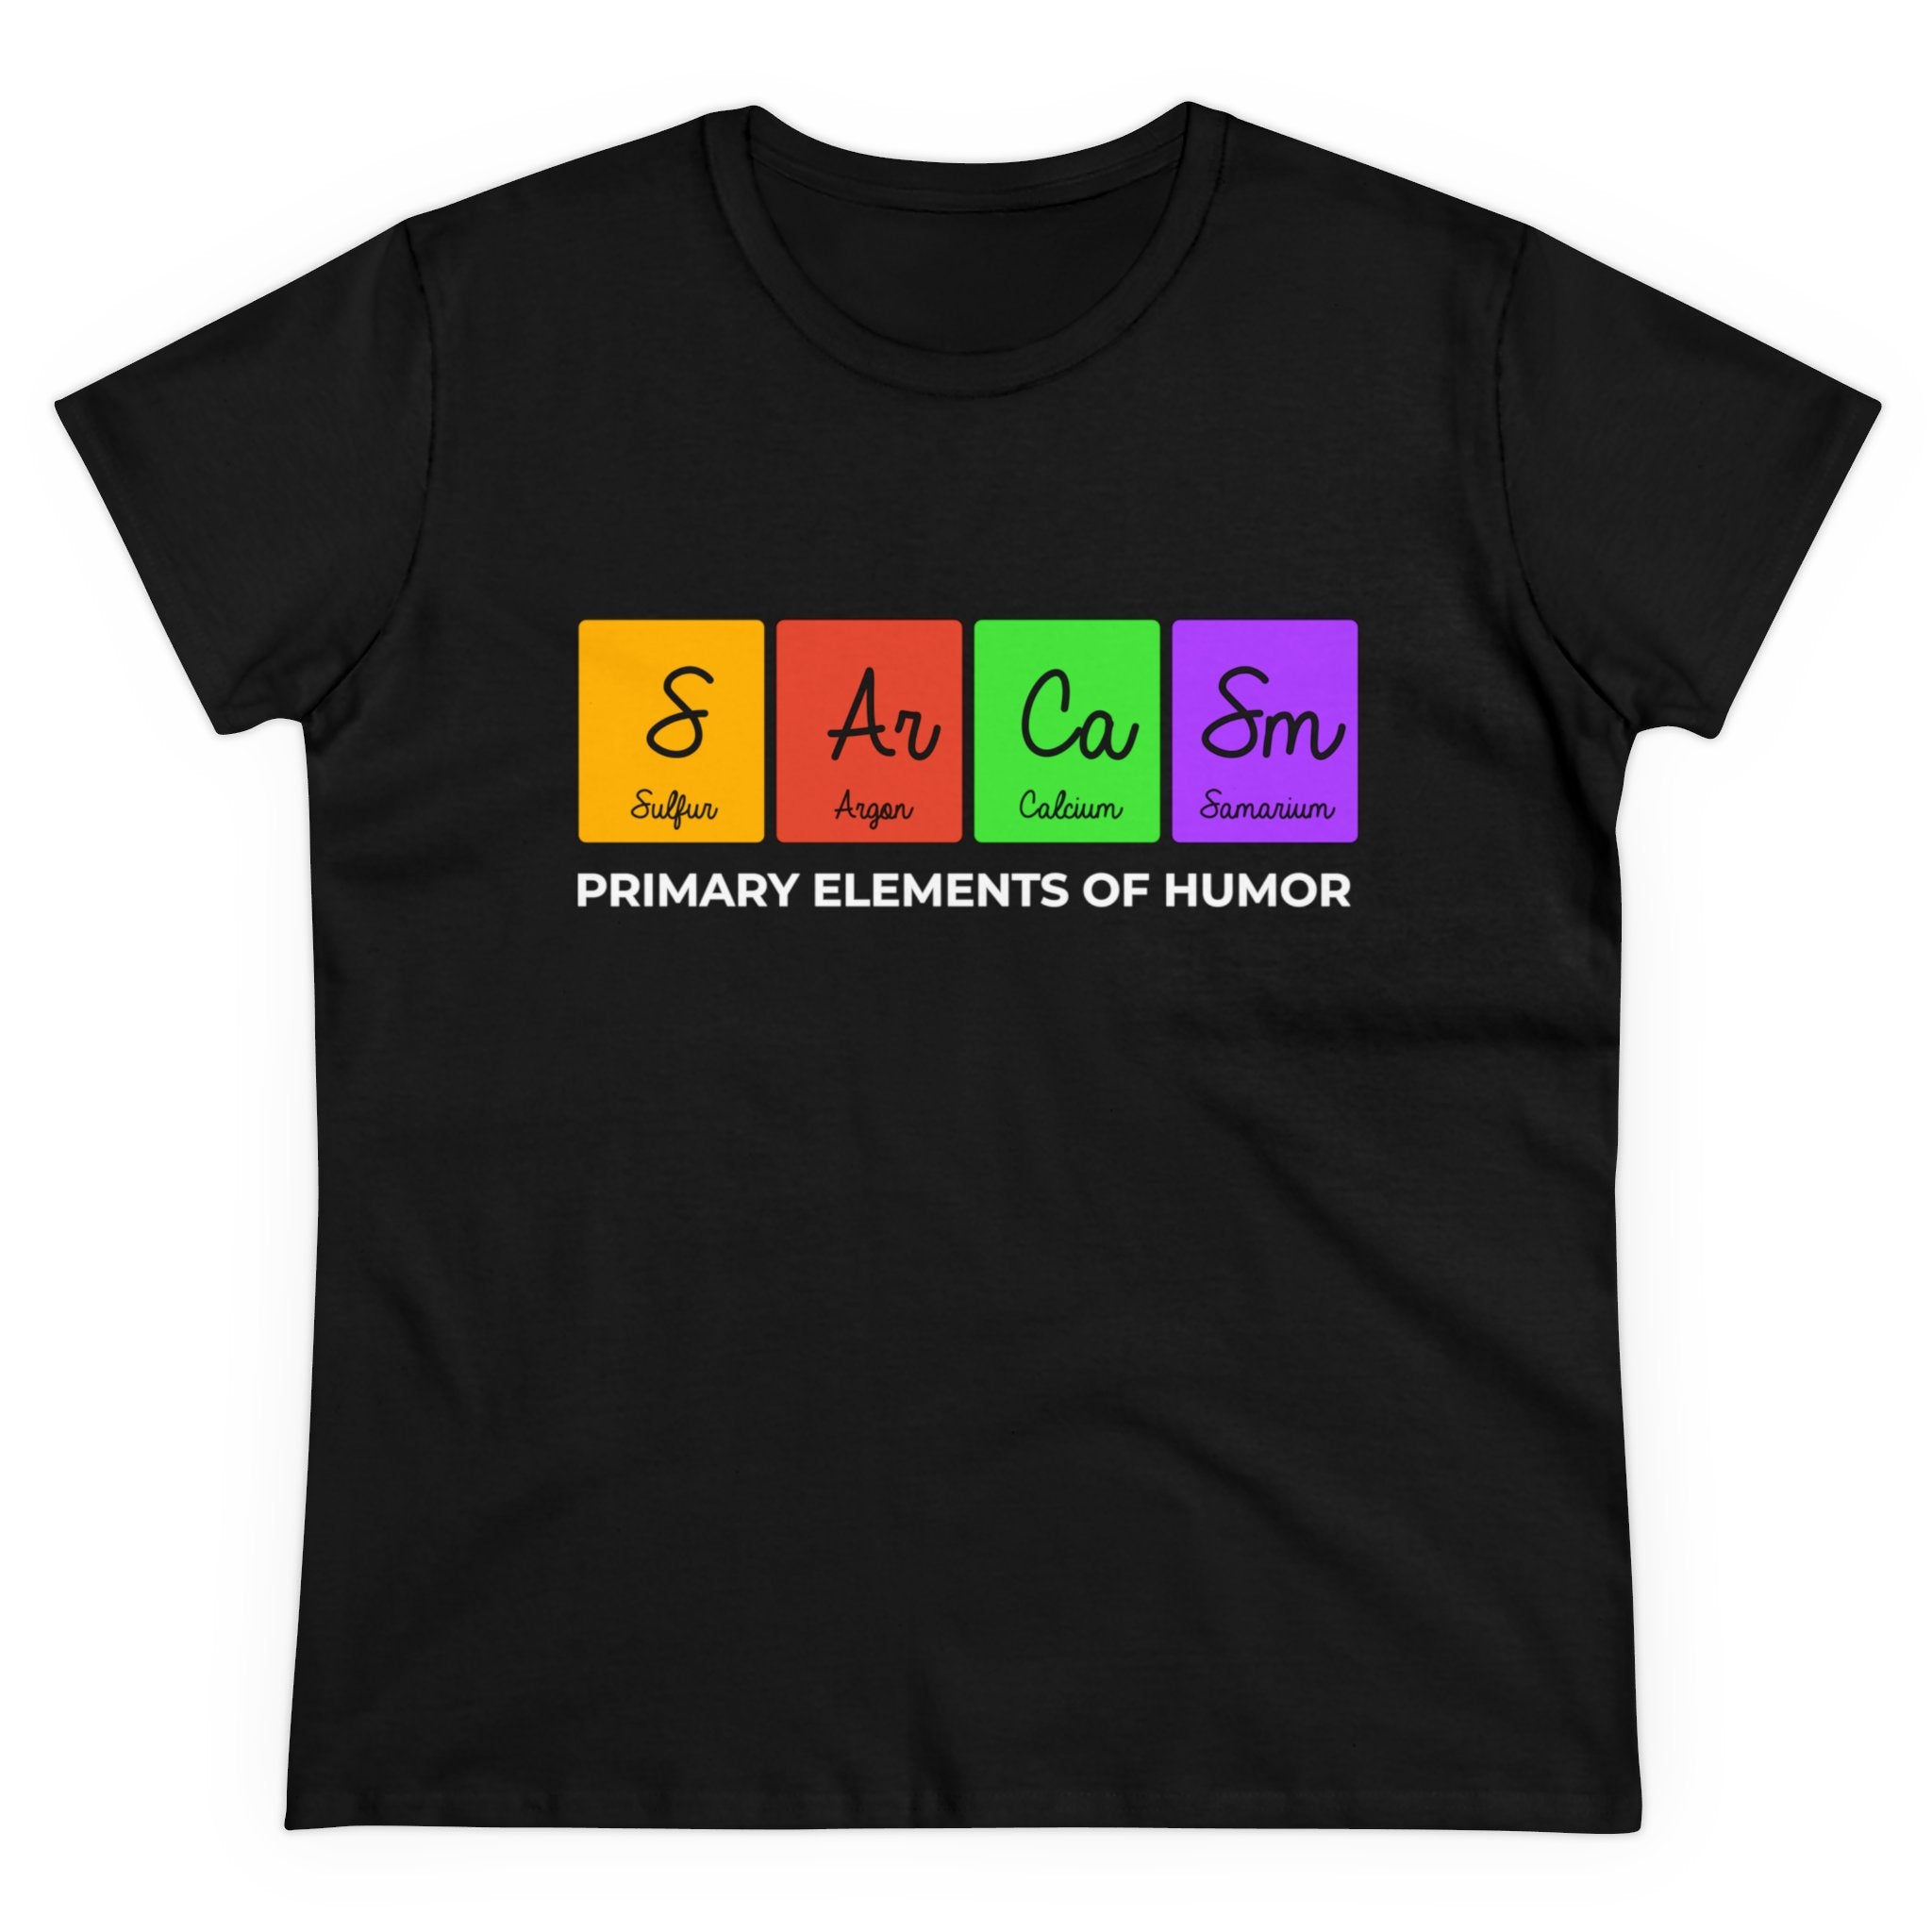 This S-Ar-Ca-Sm - Women's Tee, made from soft cotton, showcases a design with vibrant periodic table elements: Sulfur (S), Argon (Ar), Calcium (Ca), and Samarium (Sm). Below the elements, the text reads "PRIMARY ELEMENTS OF HUMOR.